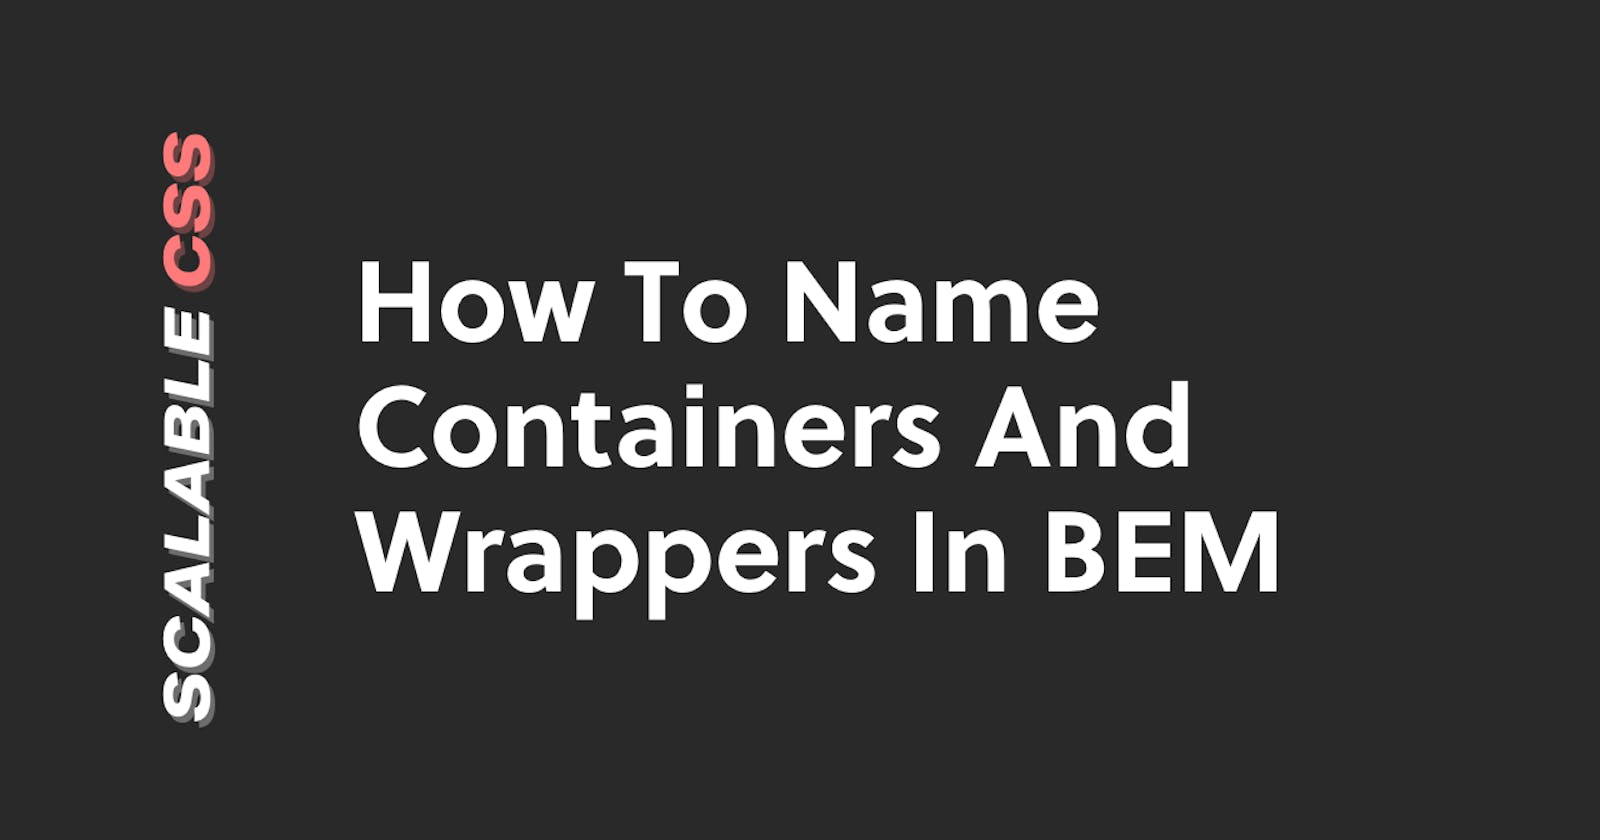 How To Name Containers And Wrappers In BEM